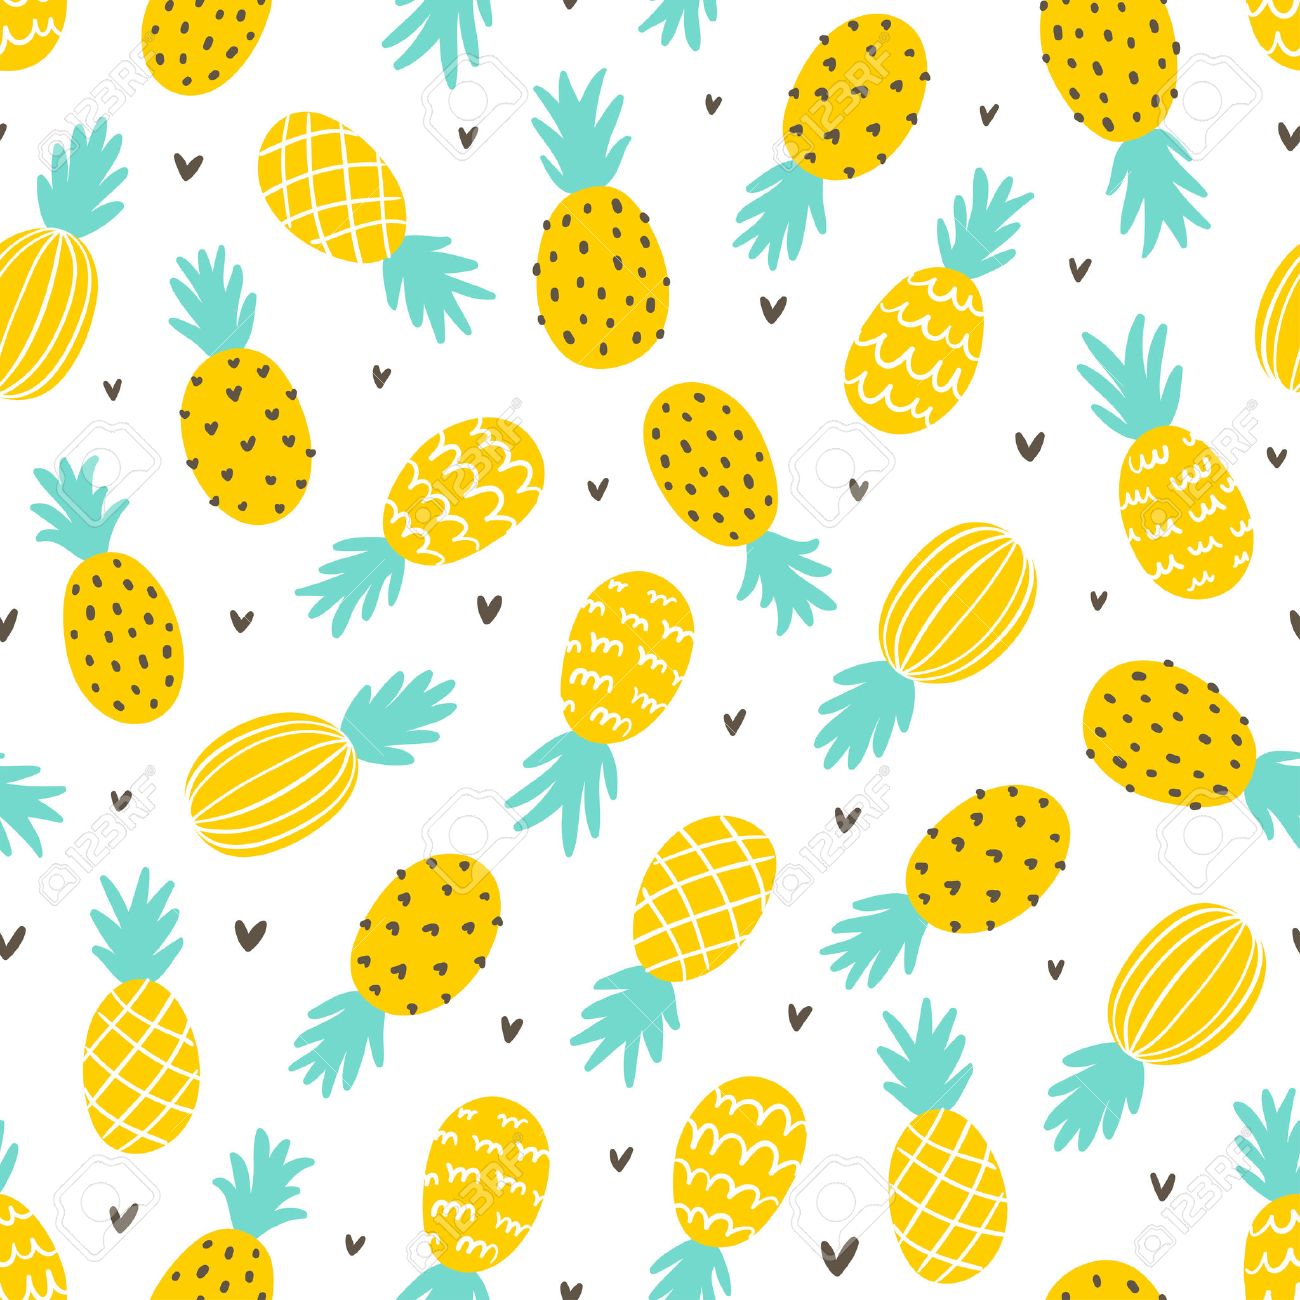 Pineapple And Hearts Seamless Pattern Background Royalty Free